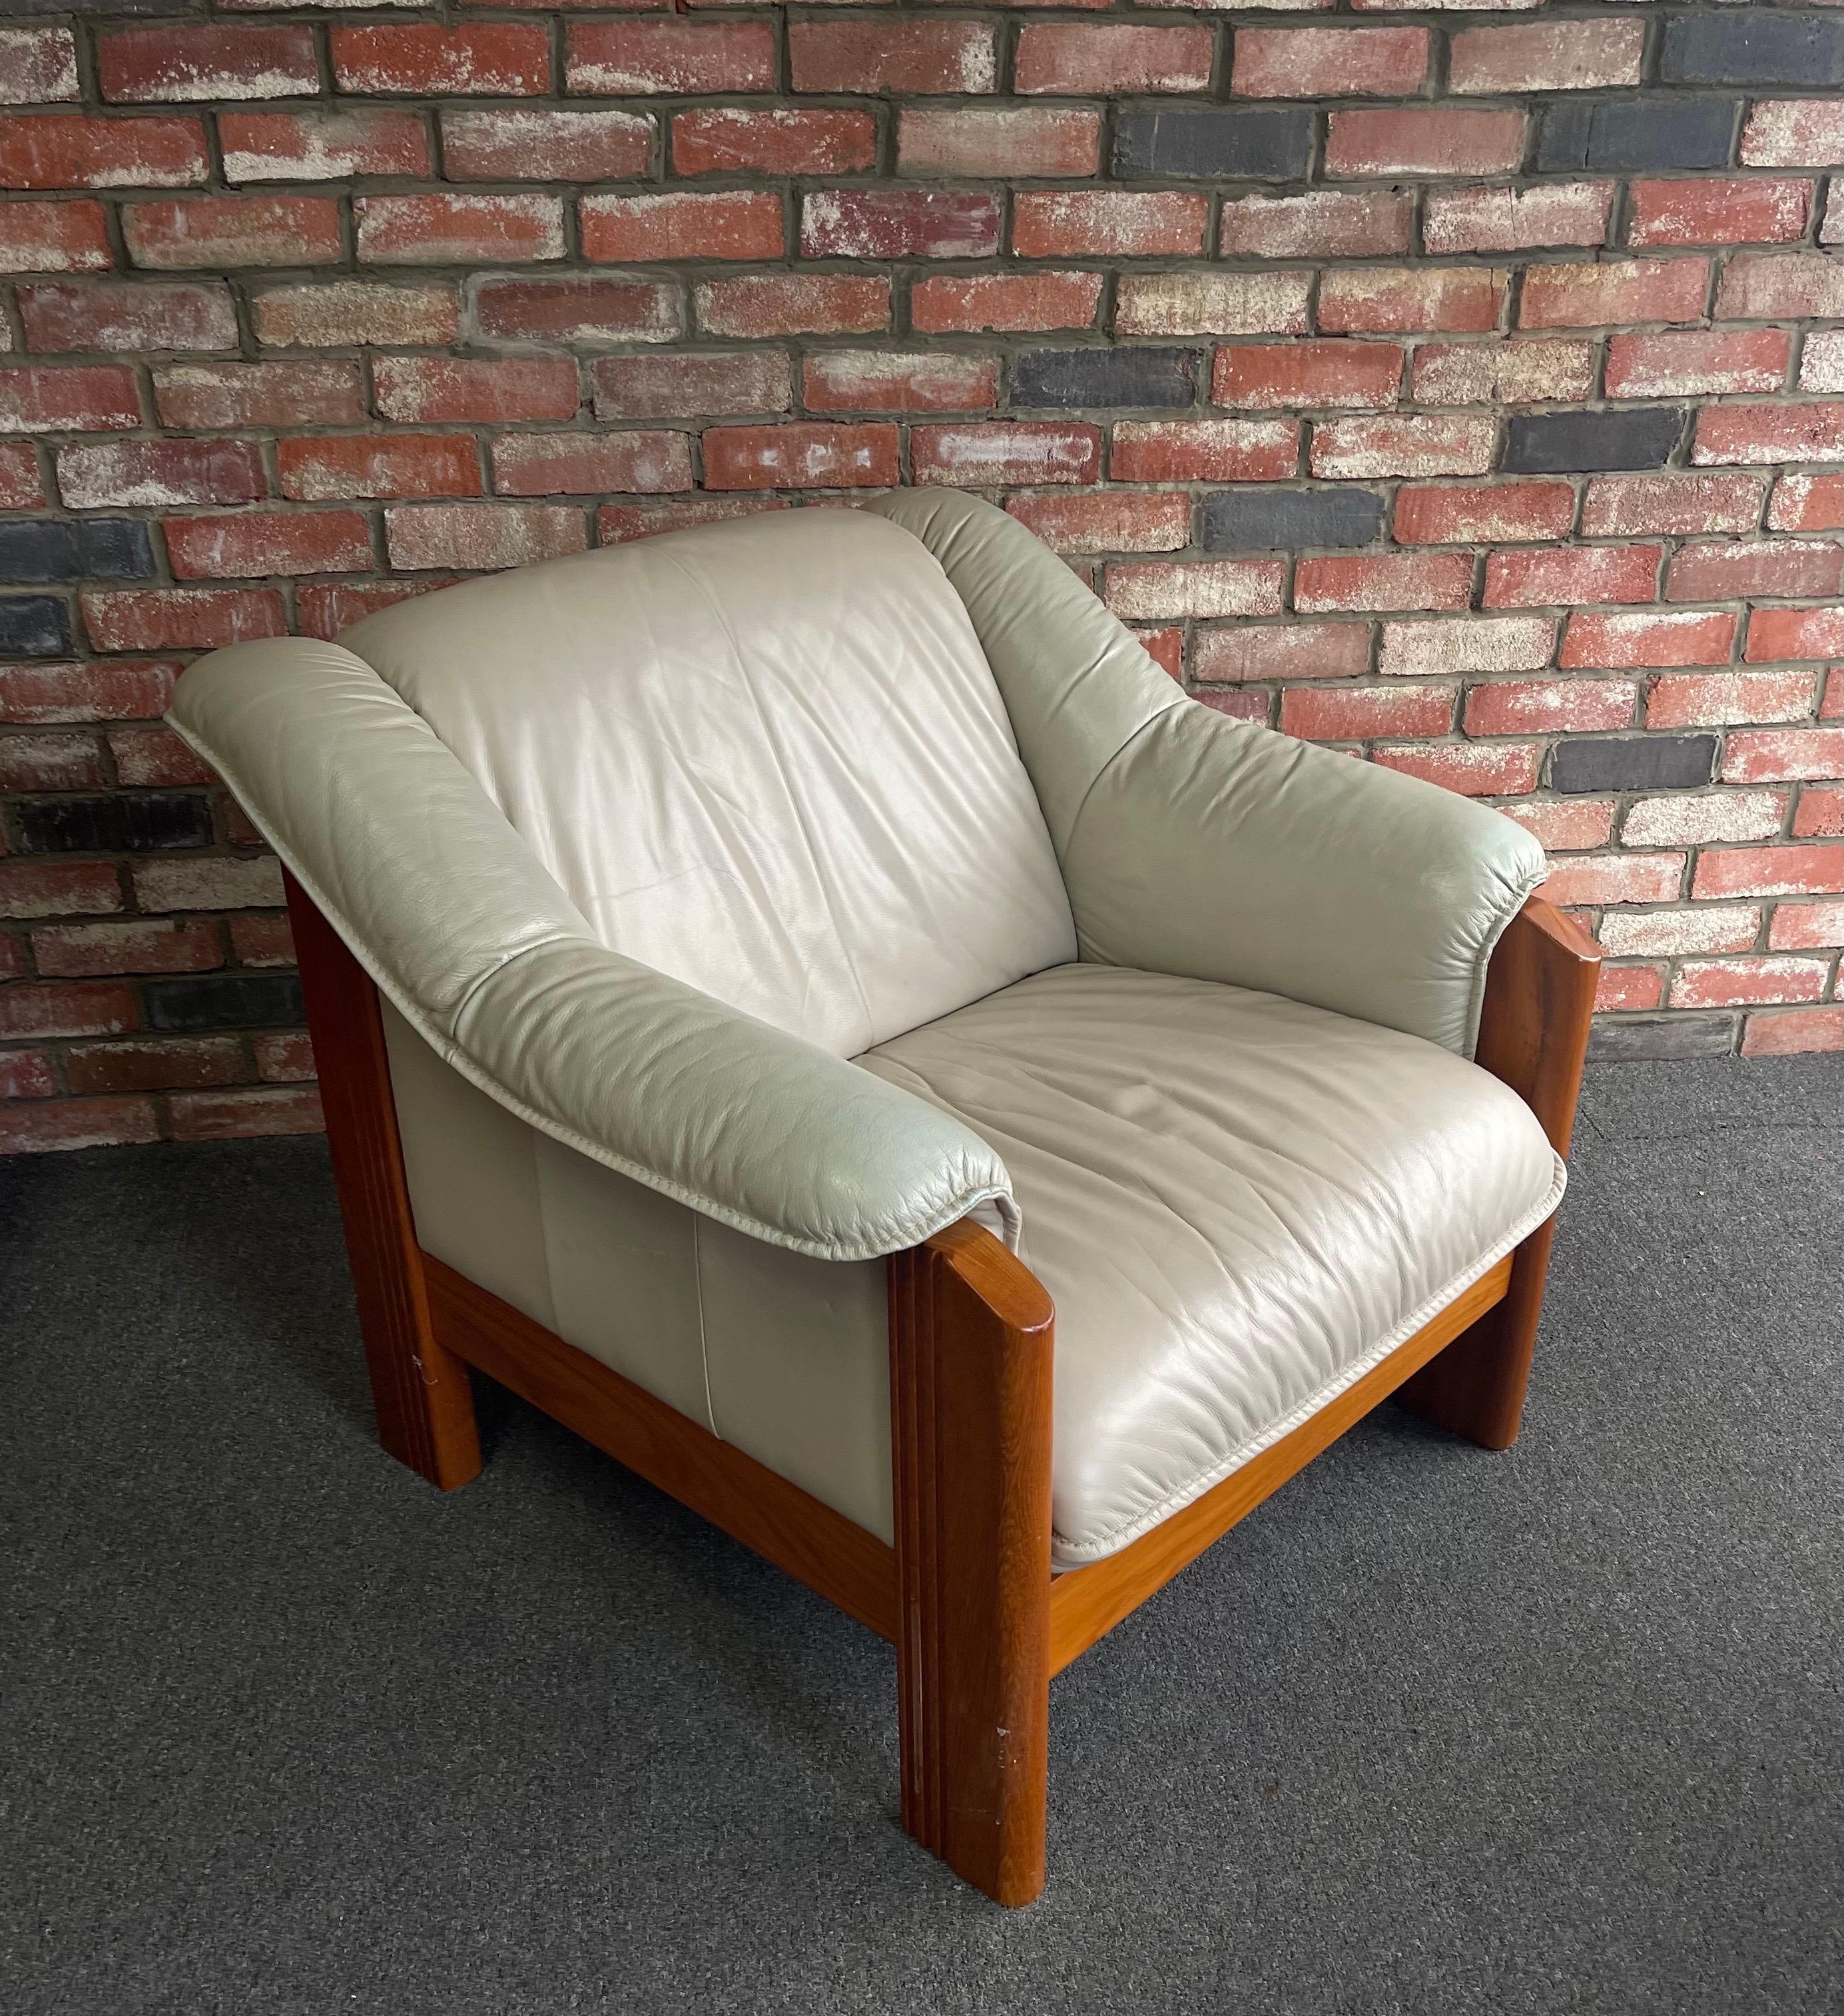 Striking postmodern solid teak and tan leather armchair by Ekorness, circa 1980s. The chair is in very good vintage condition and is very comfortable to sit in. I have a second identical chair available for sale; the tan color is a tiny bit lighter.